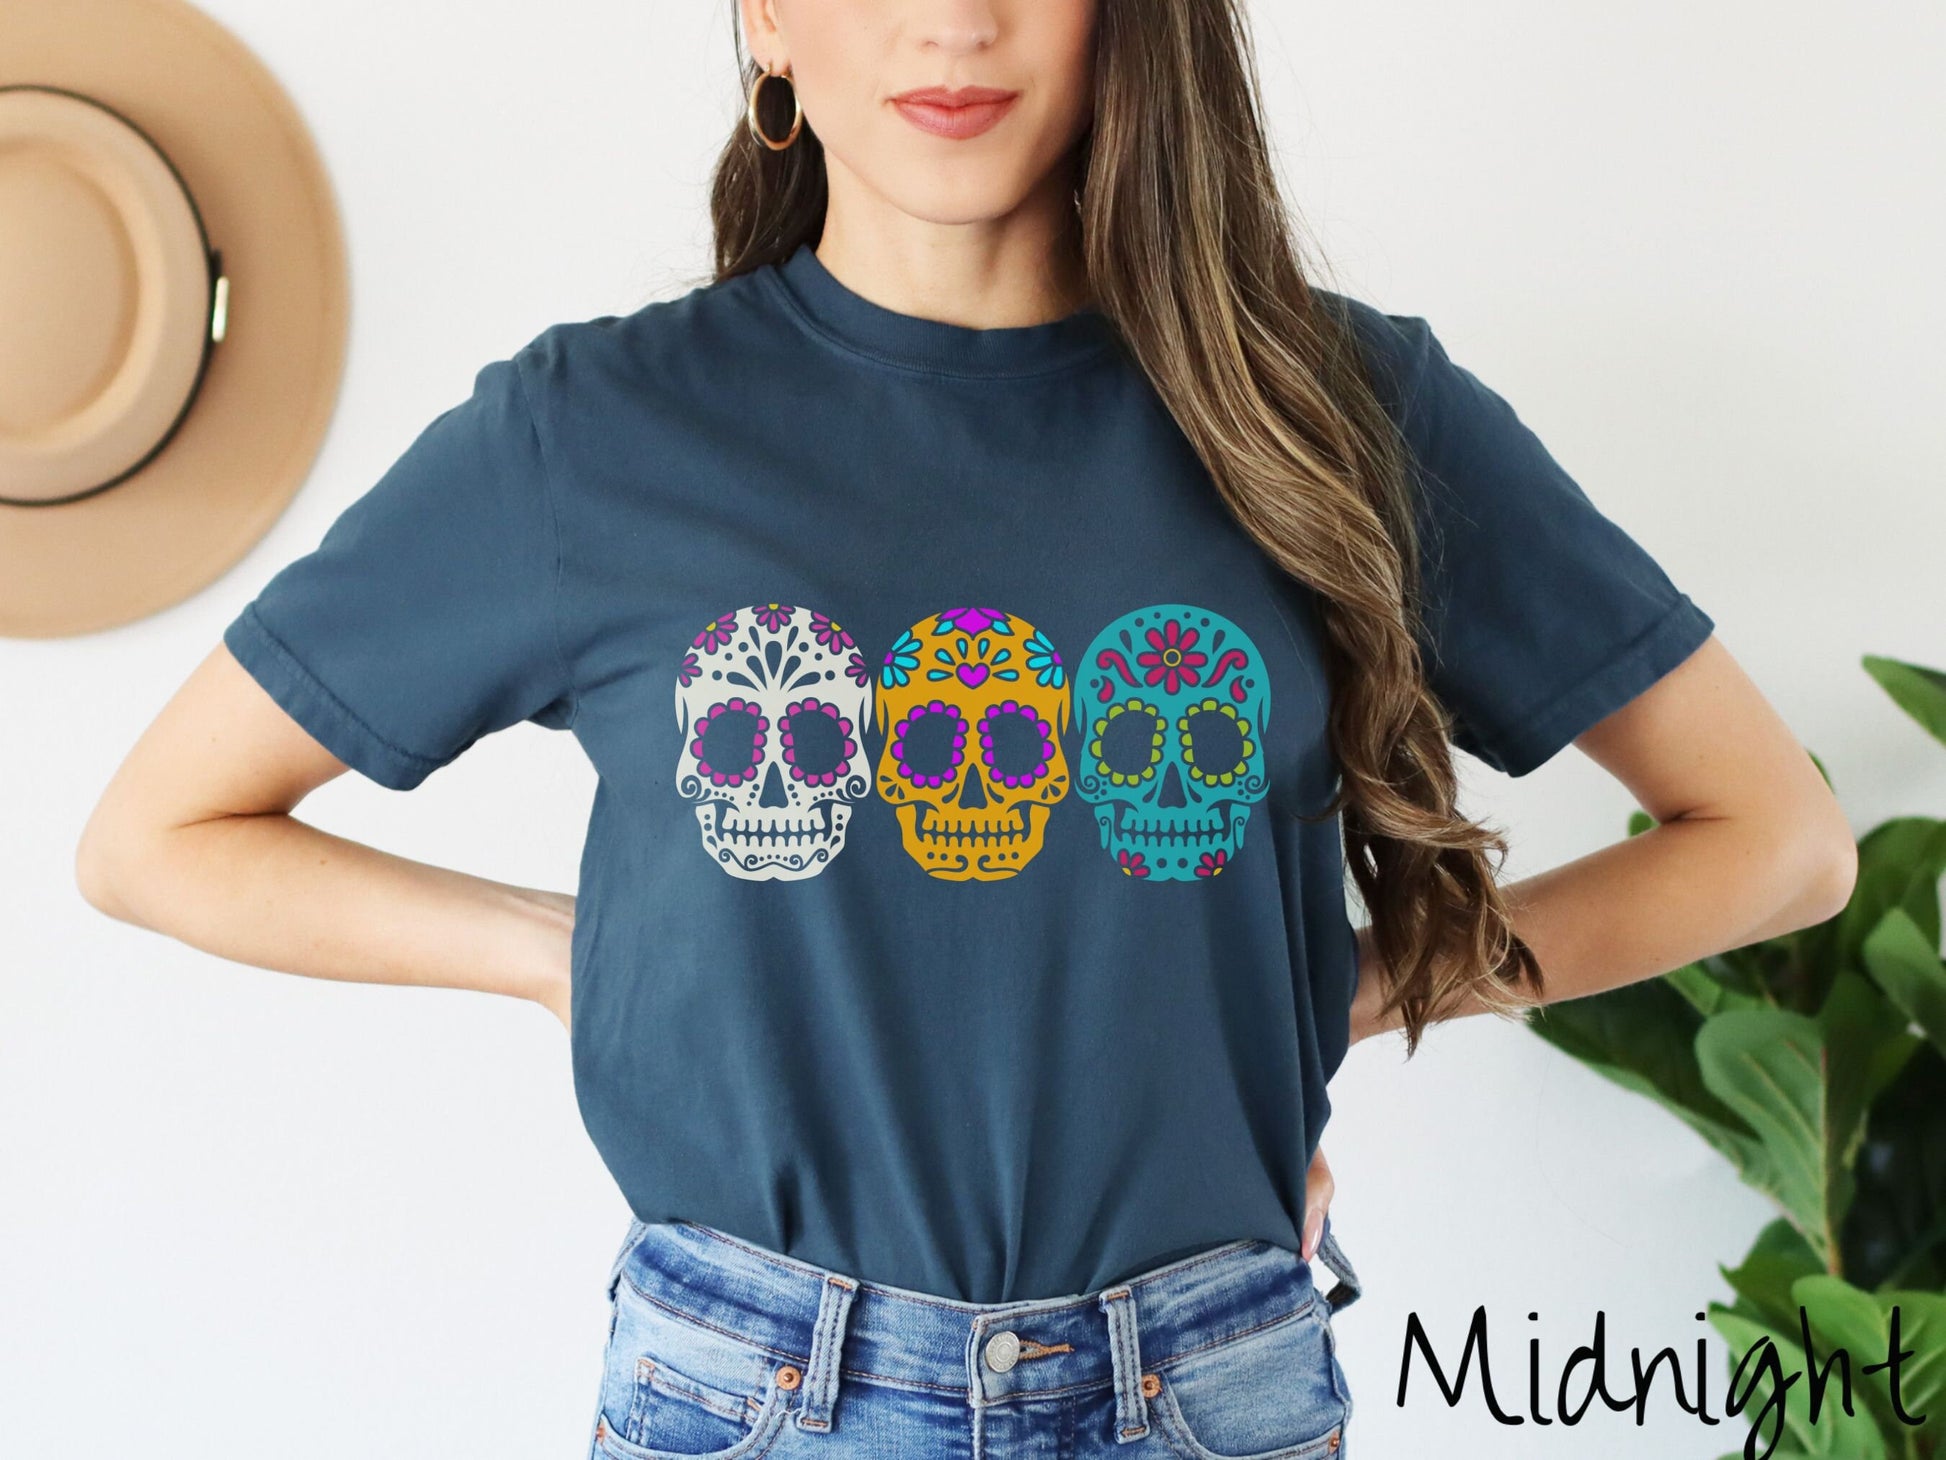 A woman wearing a cute, vintage midnight colored Comfort Colors t-shirt with three sugar skulls across the front. One is white with pink flowers, the next is orange with purple and teal flowers, and the third is teal with red flowers.